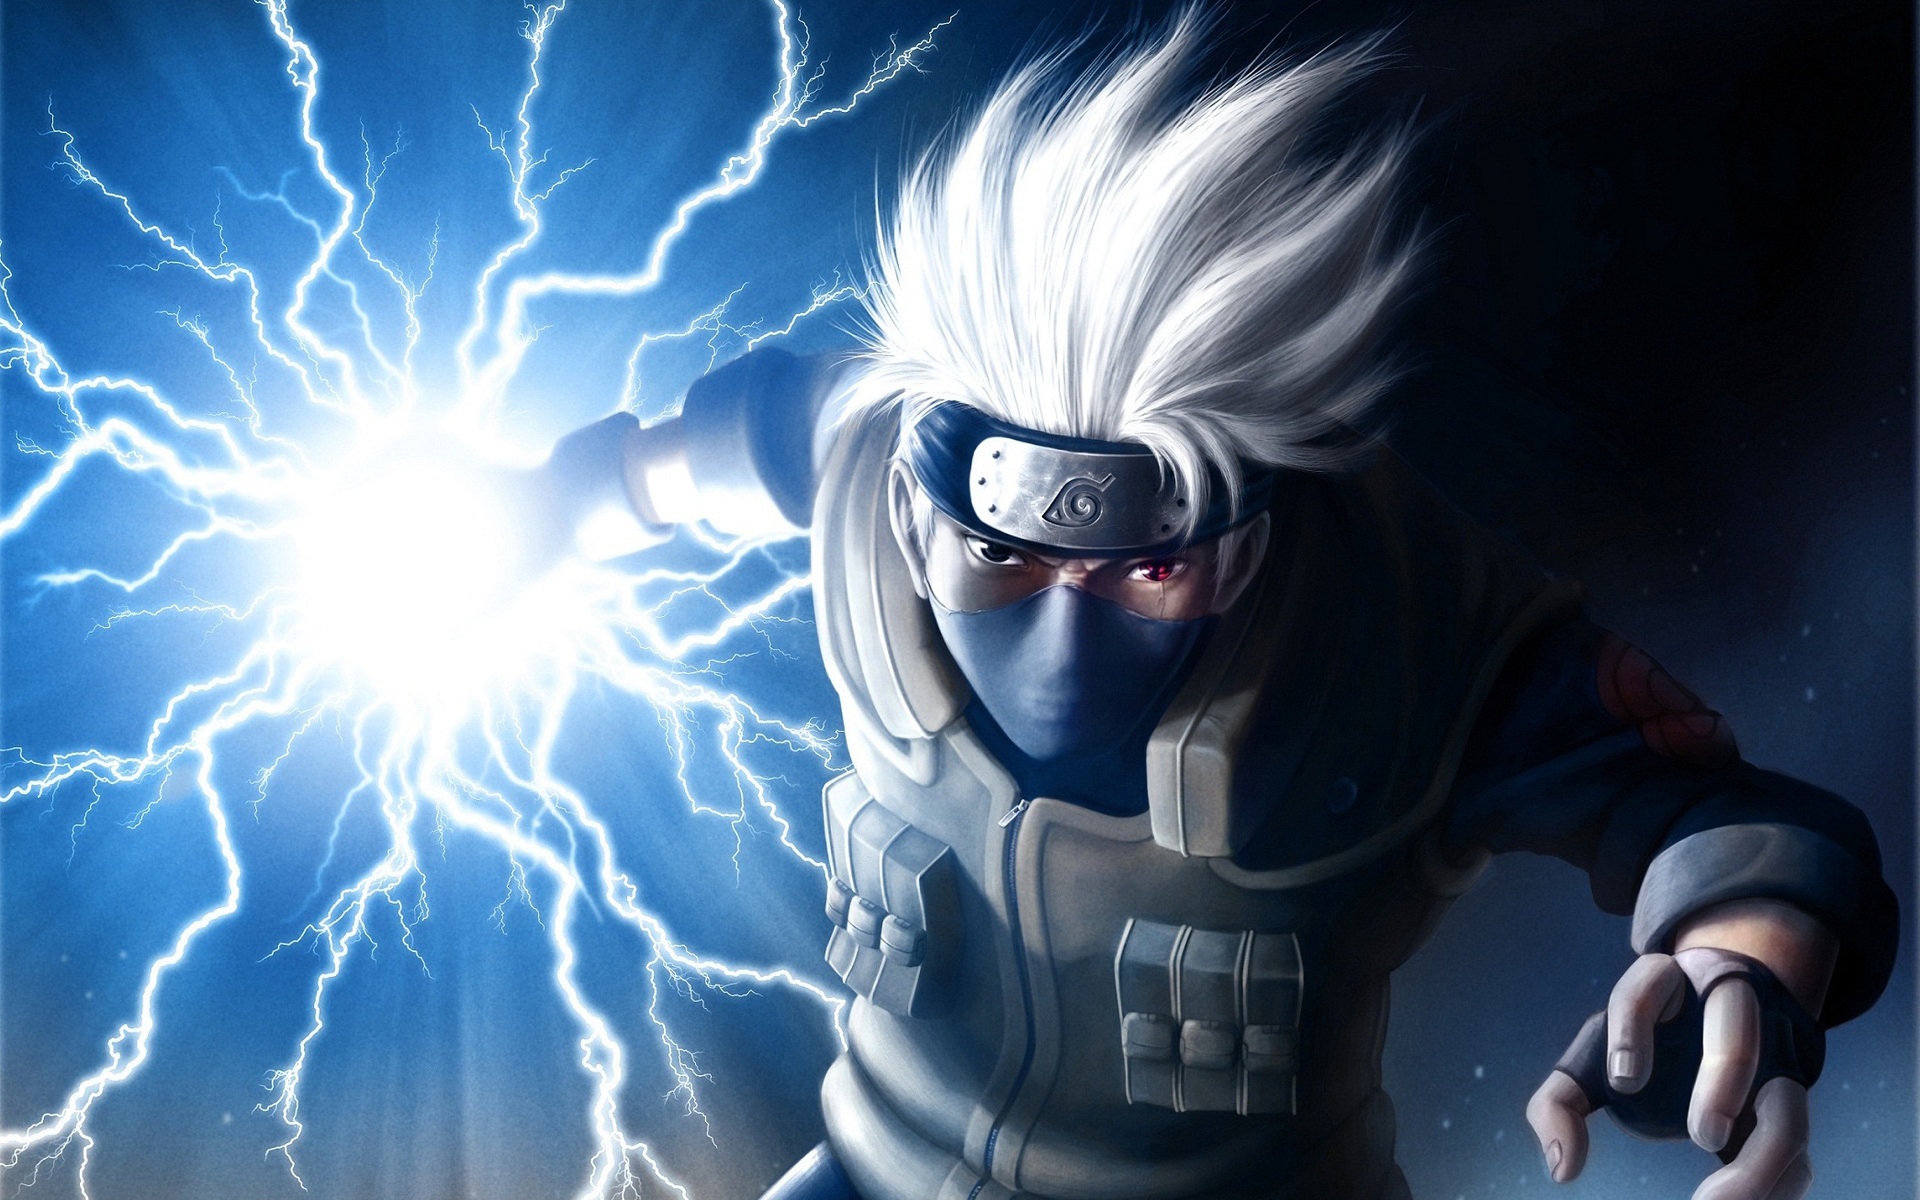 Free Download Naruto Shipuden Wallpapers Anime Hd Wallpapers Desktop 1920x1200 For Your Desktop Mobile Tablet Explore 48 Naruto Laptop Wallpapers Naruto Best Wallpapers Naruto Computer Wallpaper Awesome Naruto Wallpapers